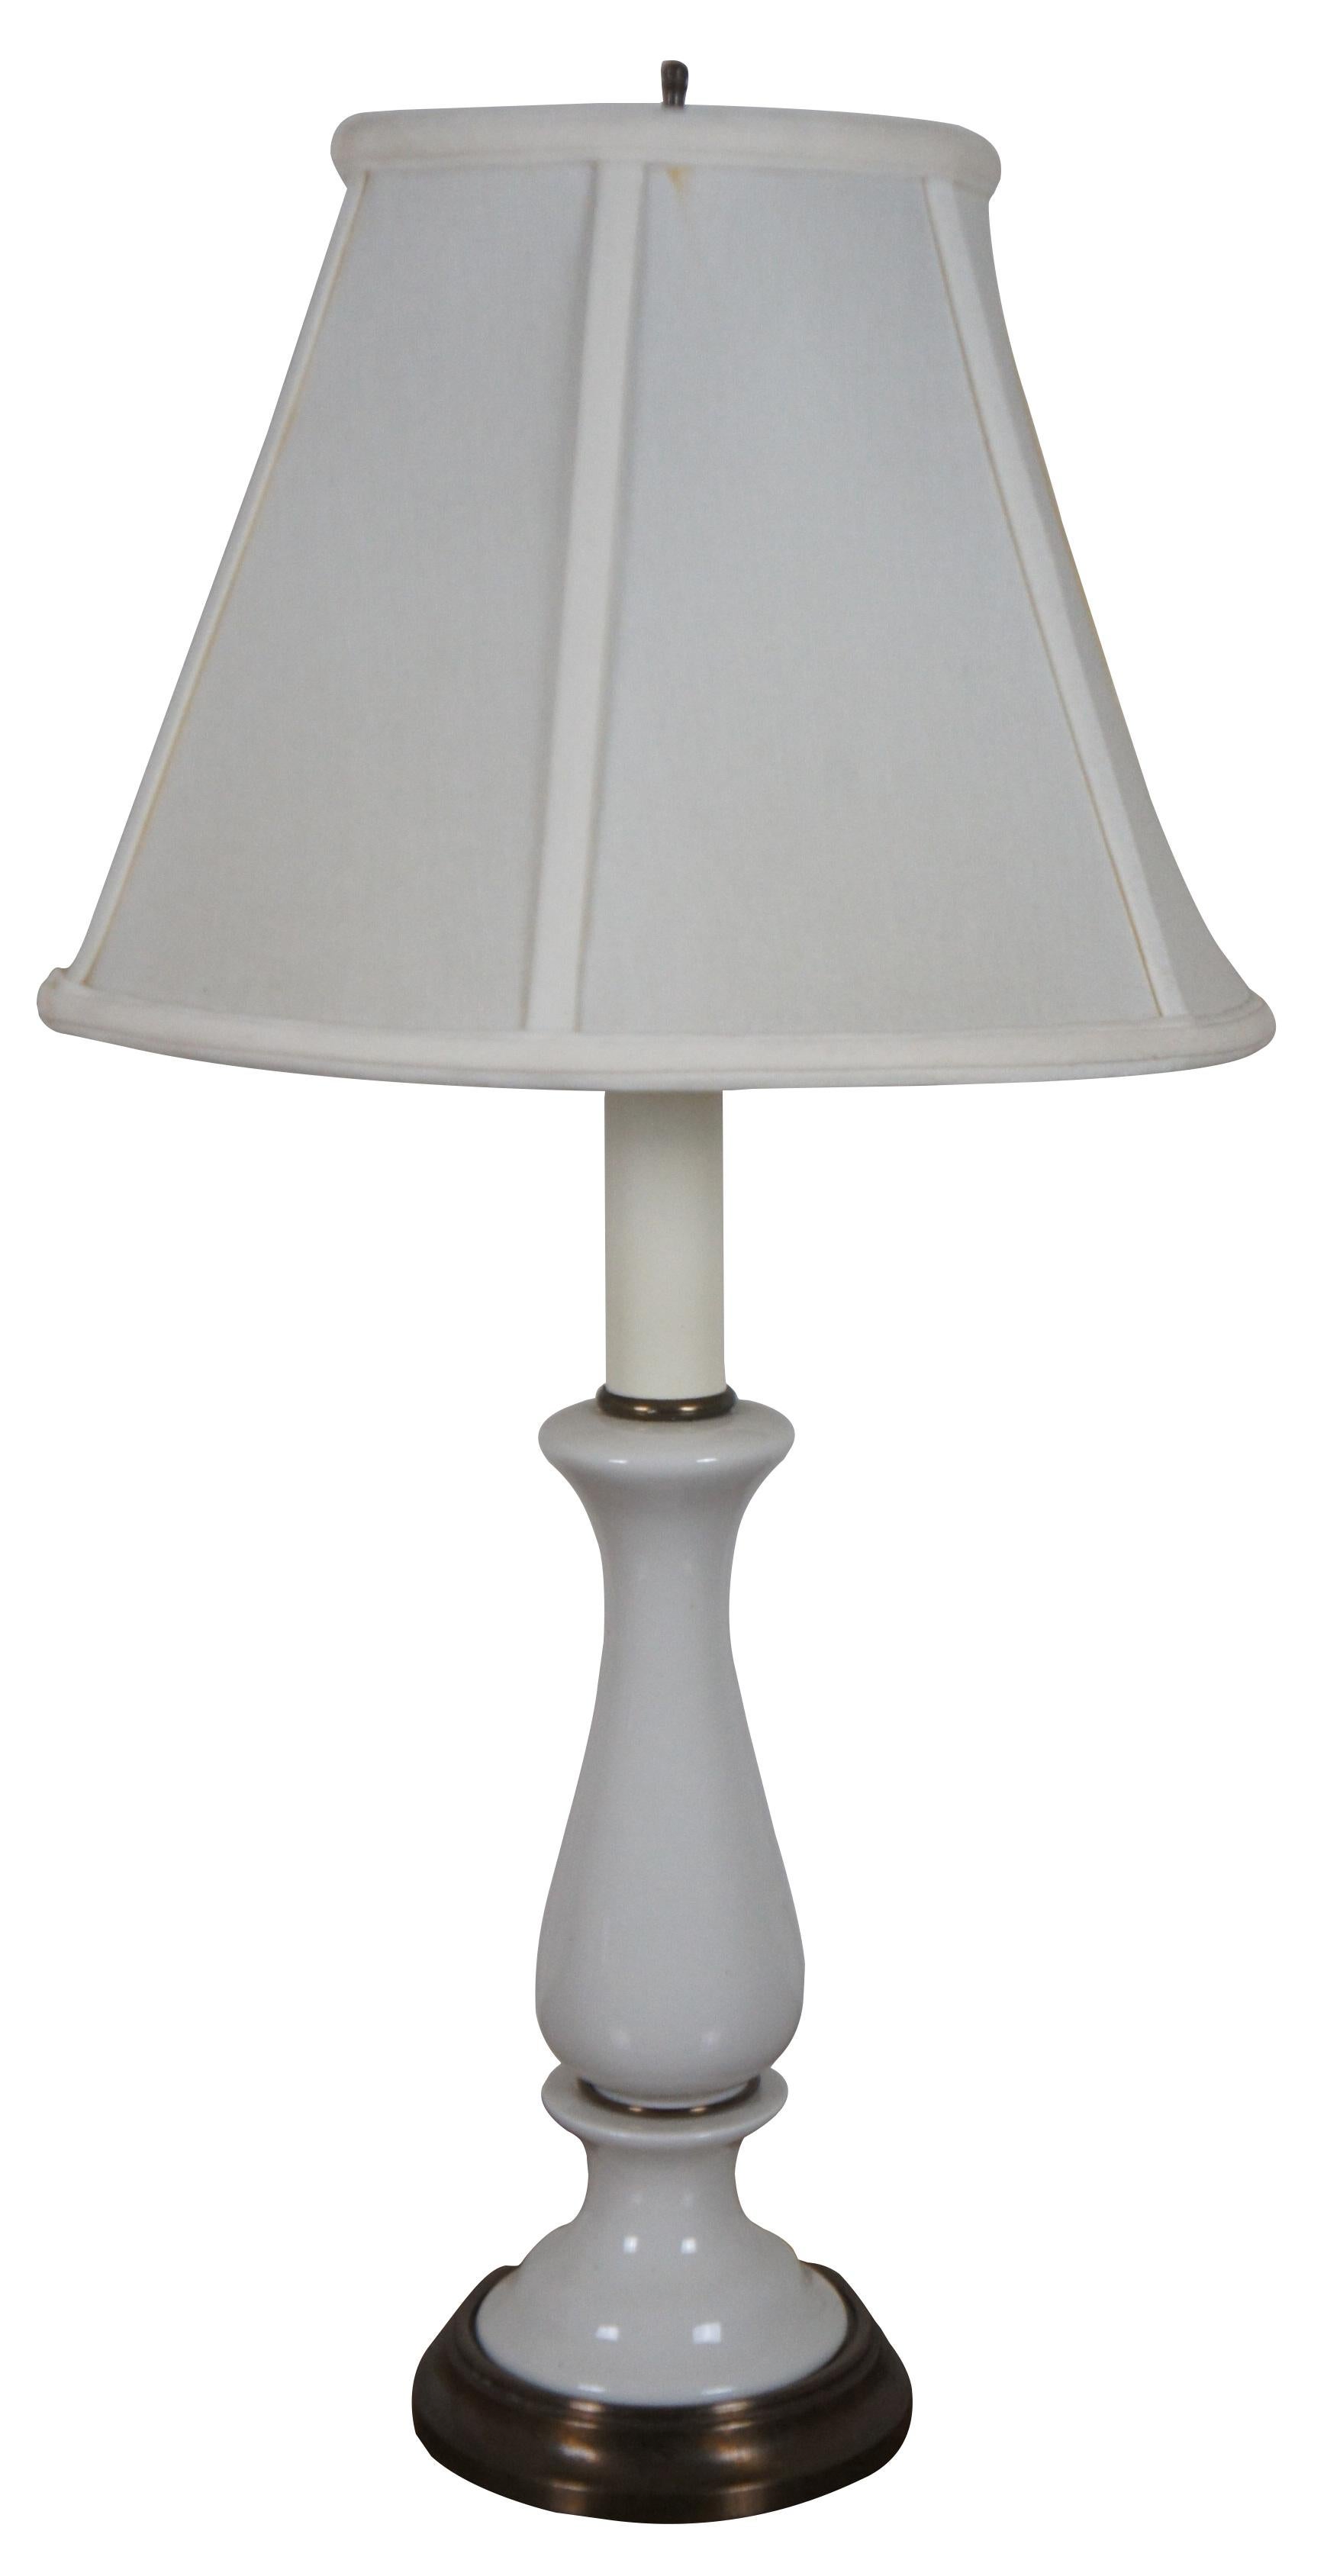 Pair of mid century Kichler white porcelain Boudoir size table lamps with candlestick tops and white shades.

Measures: 5.25” x 24” / Shade - 12.25” x 8.5” (Diameter x Height).